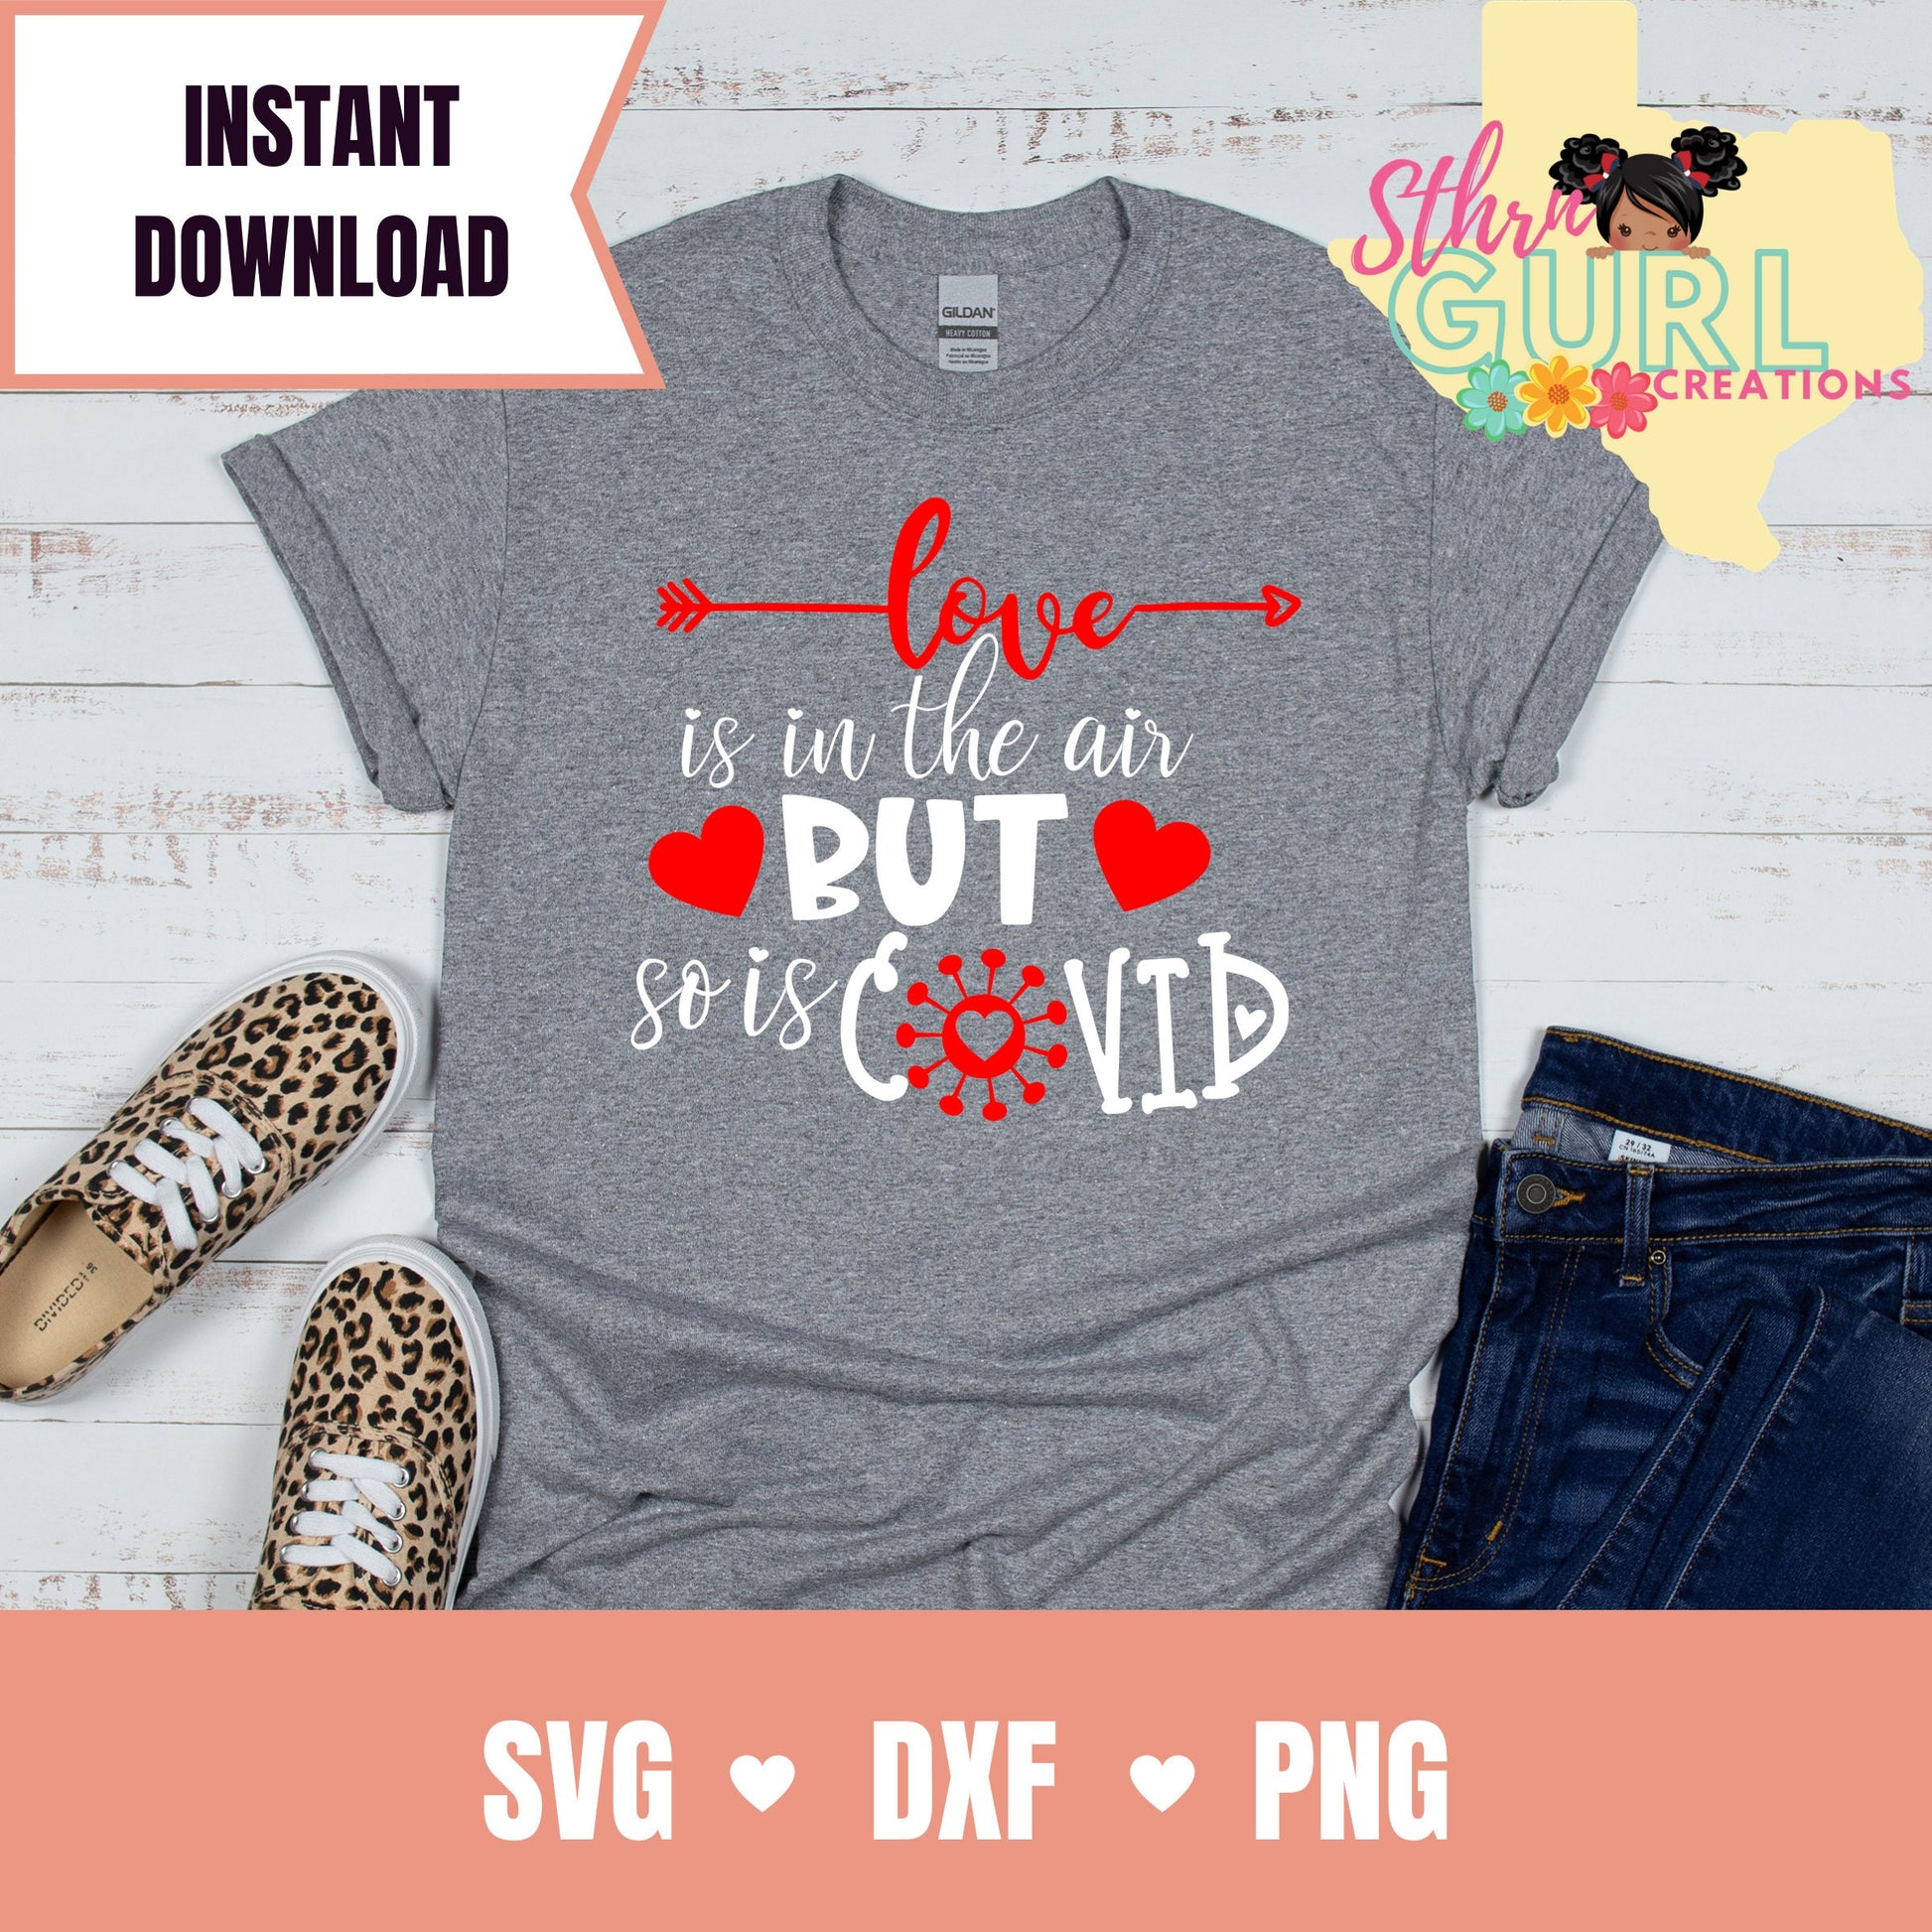 Love Is In The Air But So Is Covid SVG,Love shirt svg,Valentine's Day 2021 svg,Valentine's Day cut file,Valentine saying svg - SthrngurlCreations